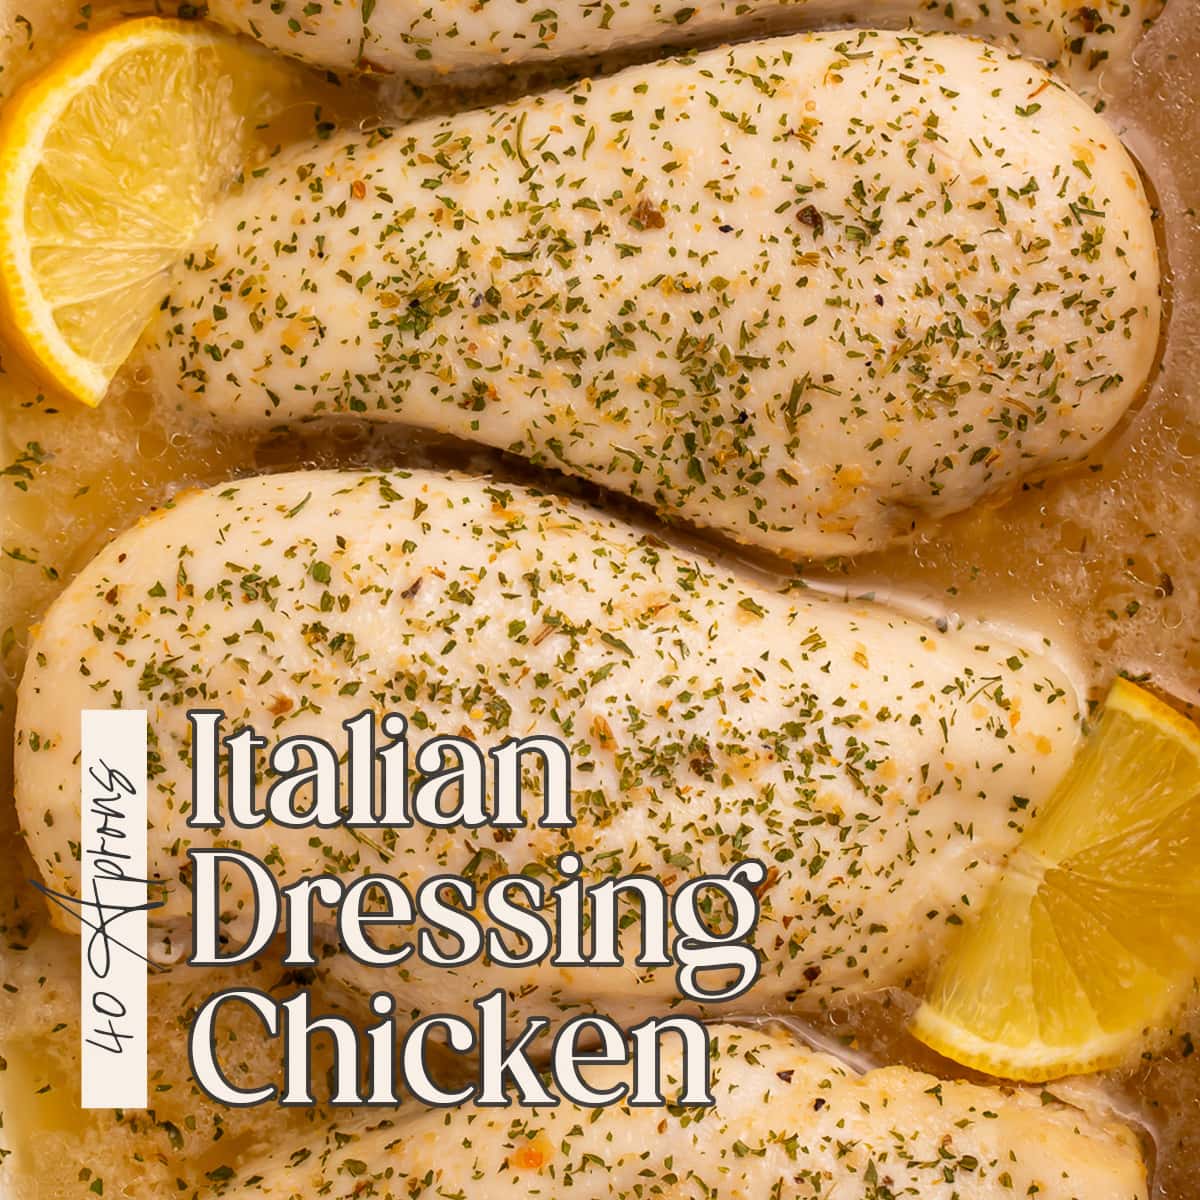 Pin graphic for Italian dressing chicken.